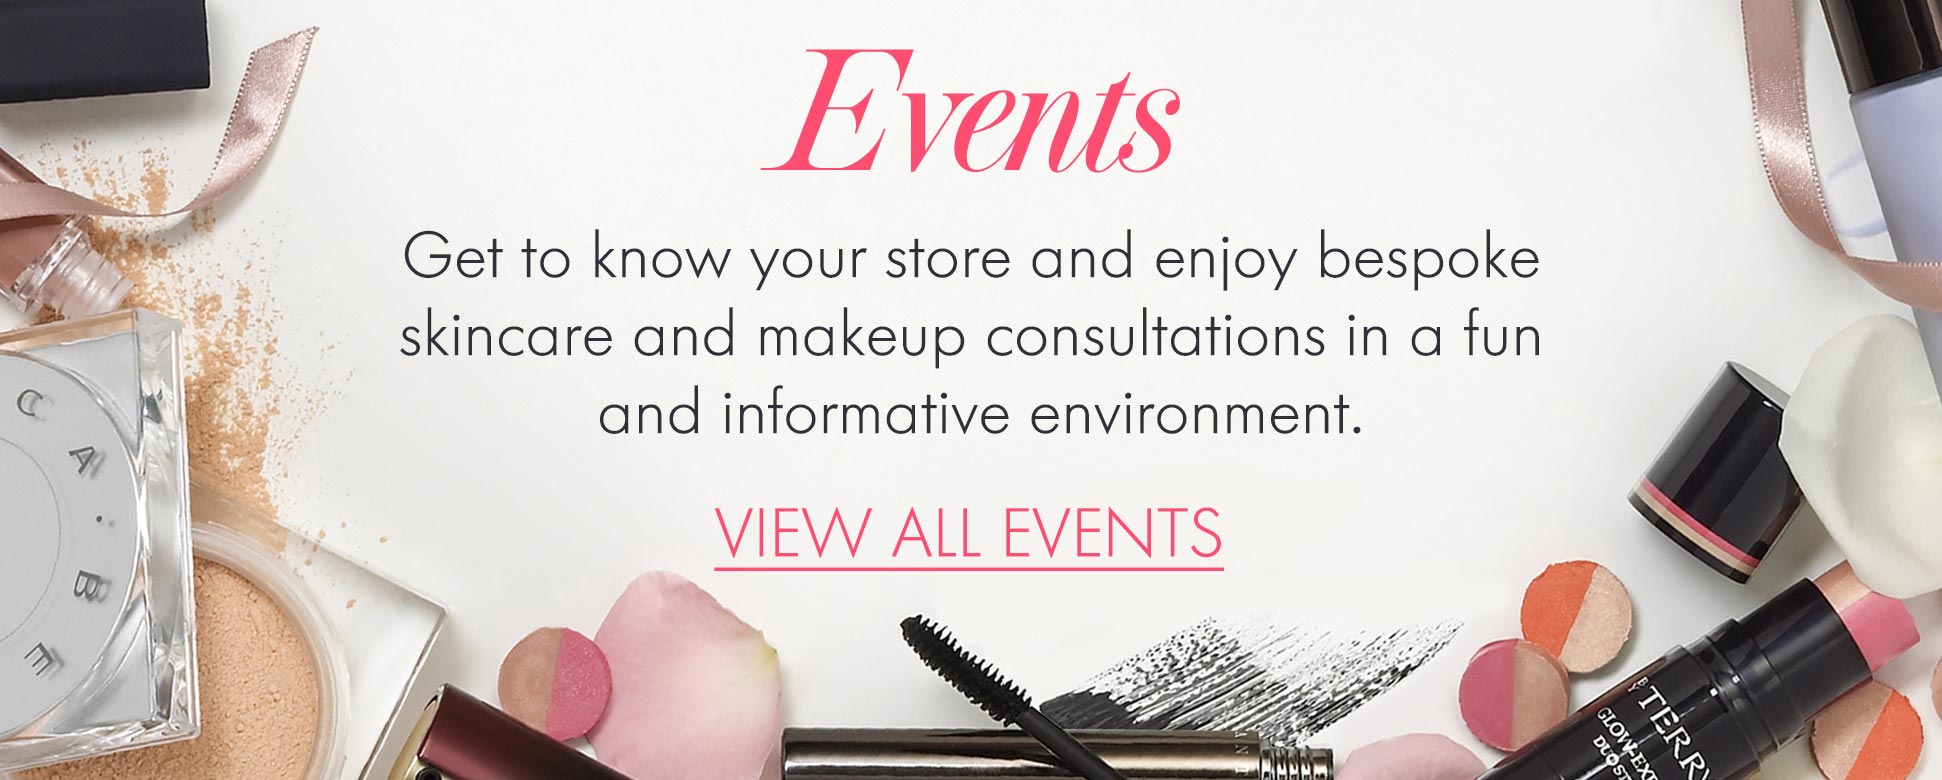 Space NK Events